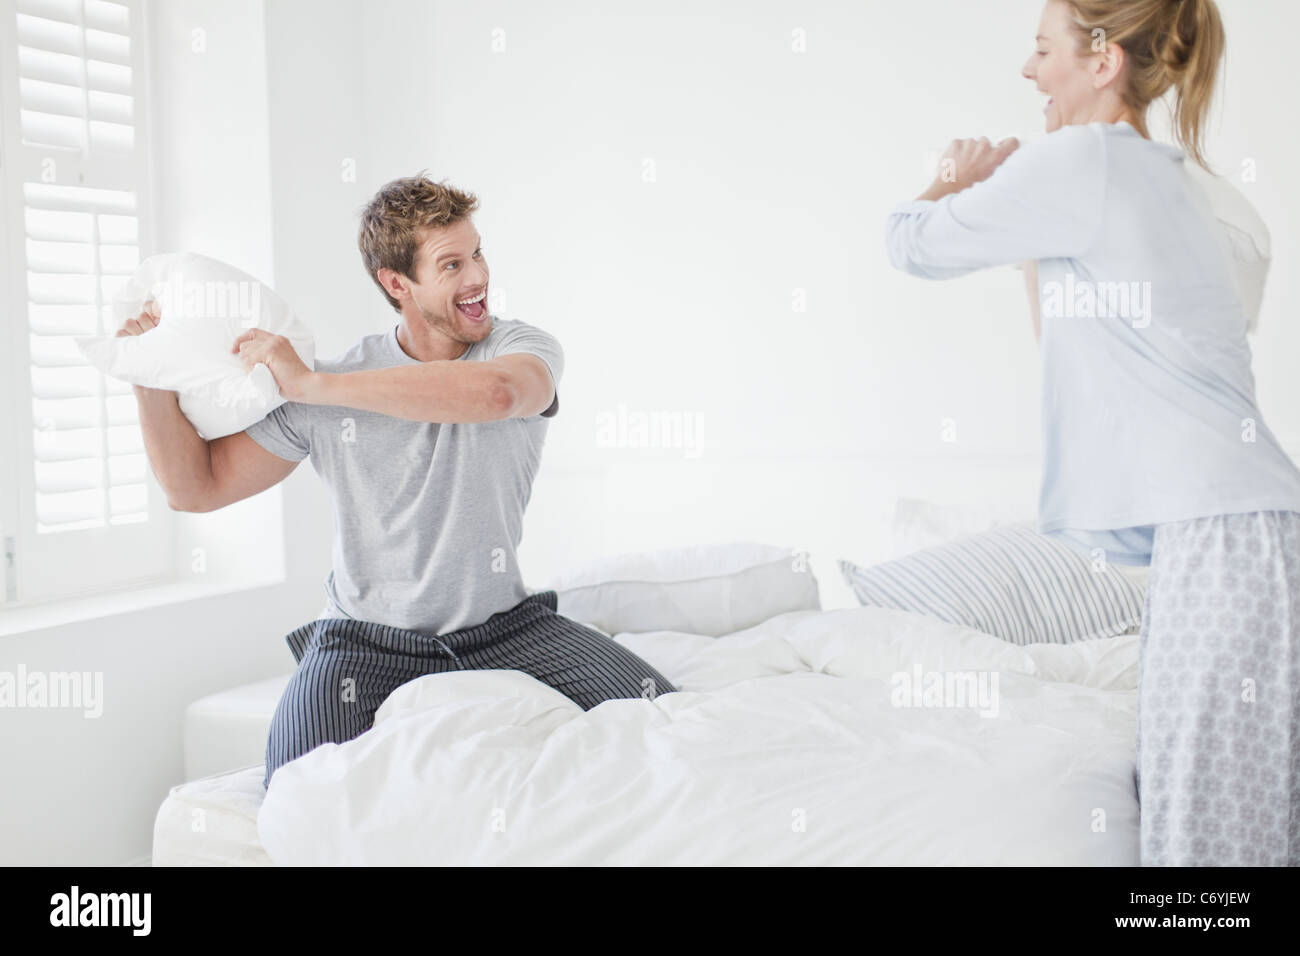 Couple having a pillow fight in bedroom Stock Photo